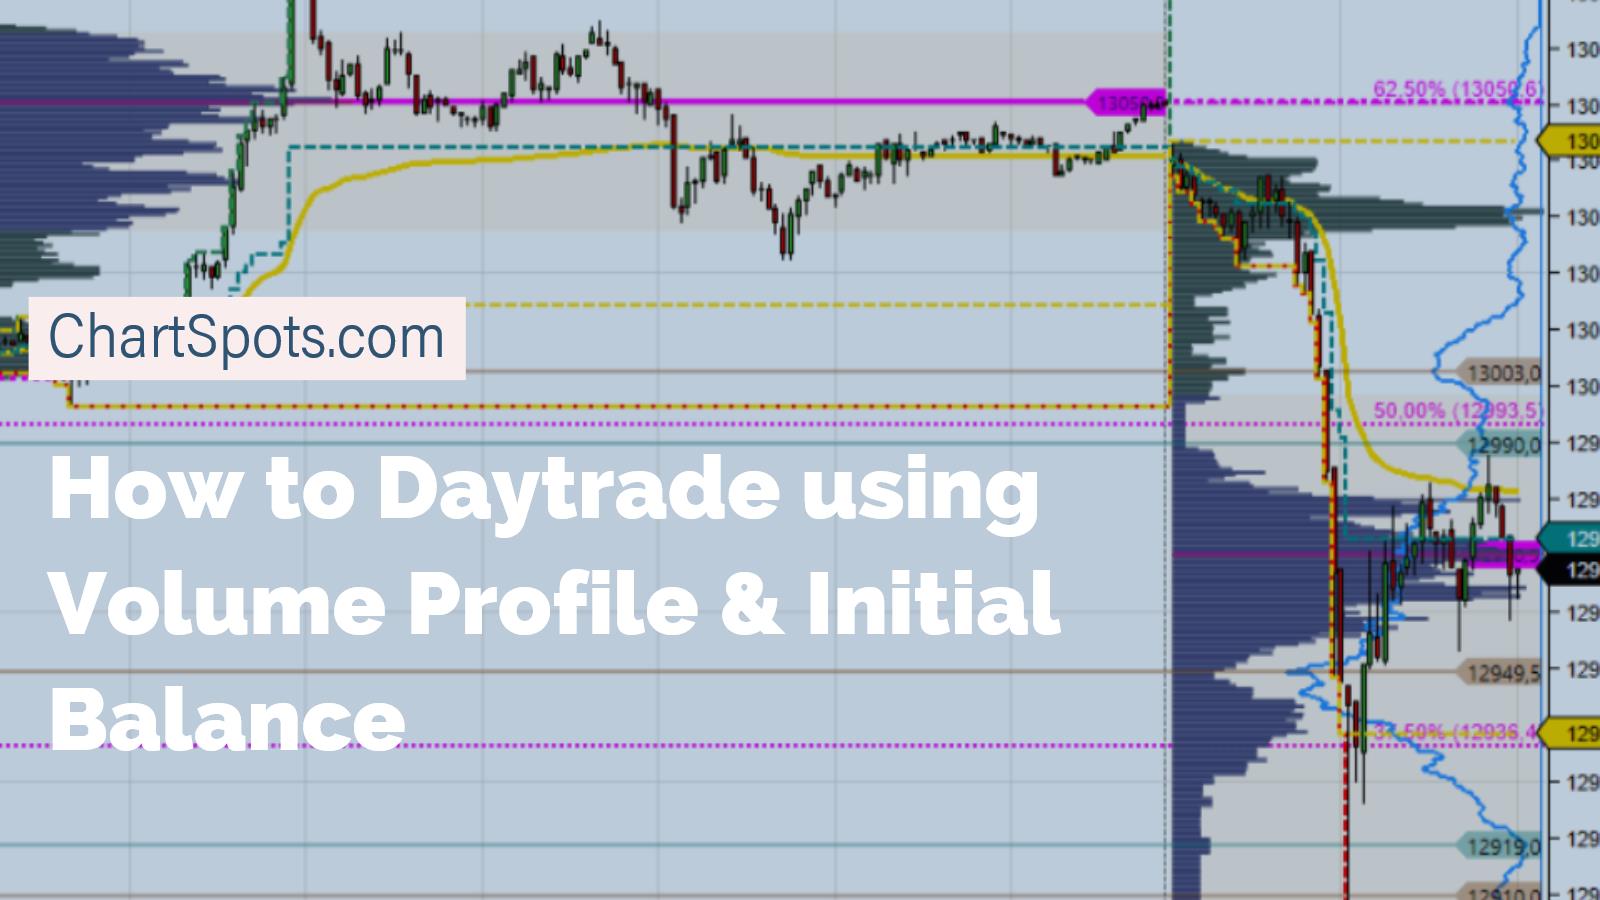 How to daytrade using Volume Profile & Initial Balance